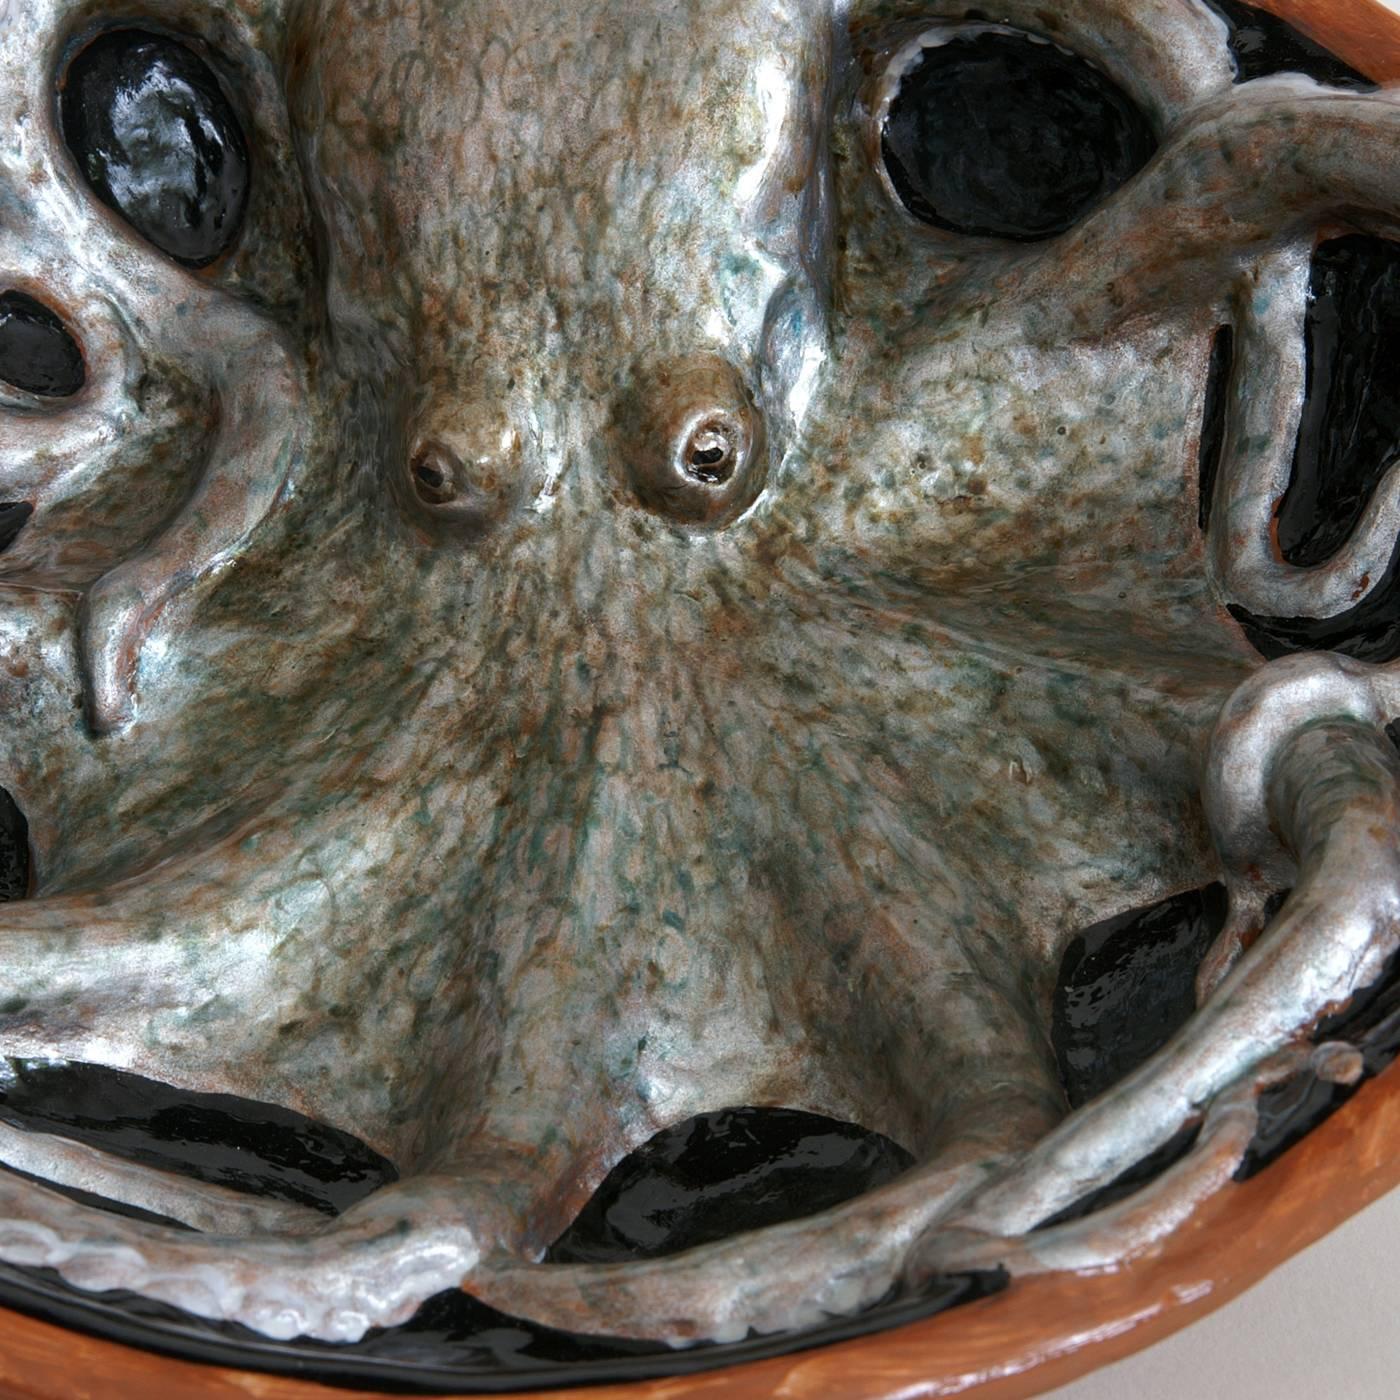 This realistic sculptural bowl in papier-maché depicts an octopus spiralled out in a bath. This striking decoration is painted by hand with natural pigments, and then given a polished resin finish. The piece is reproducible but with minor